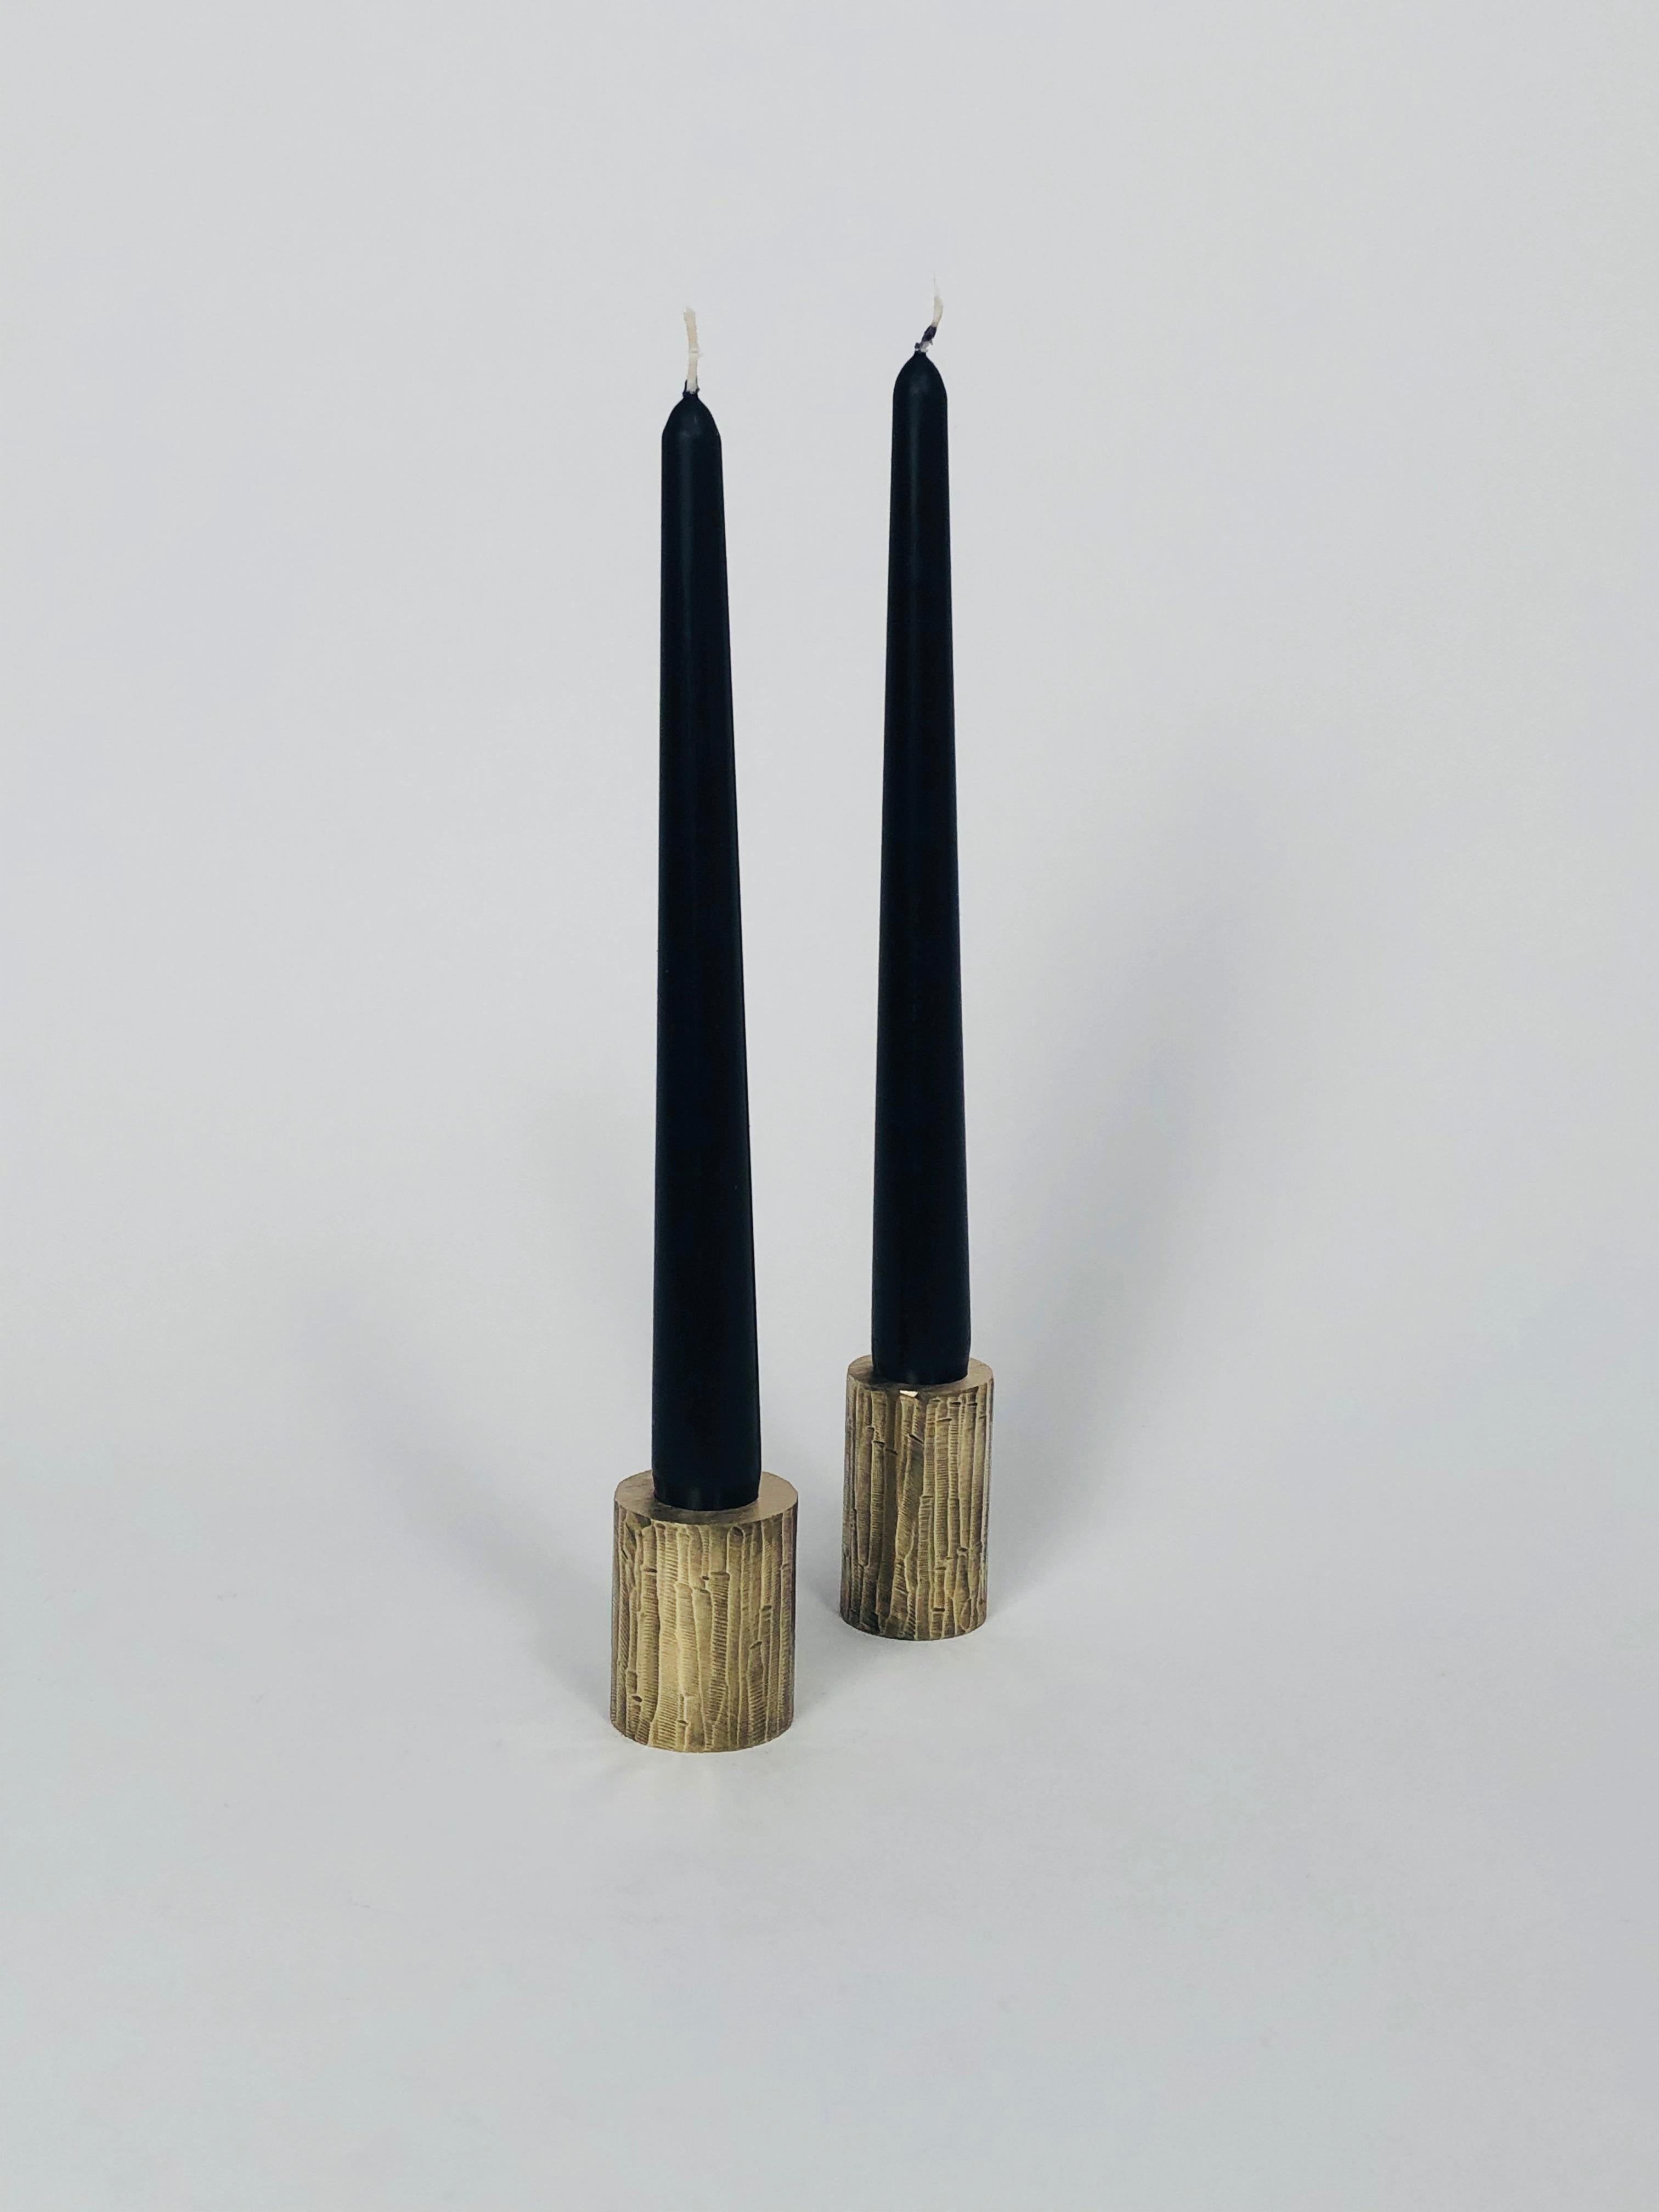 Set of 2 solid brass sculpted candleholders by William Guillon 
Each is signed William Guillon
Dimensions: Diameter 4 x height 5 cm
 Diameter 3.5 x height 6 cm
Materials: Solid brass raw finish or patinated black, with polished edge
Hand-sculpted in